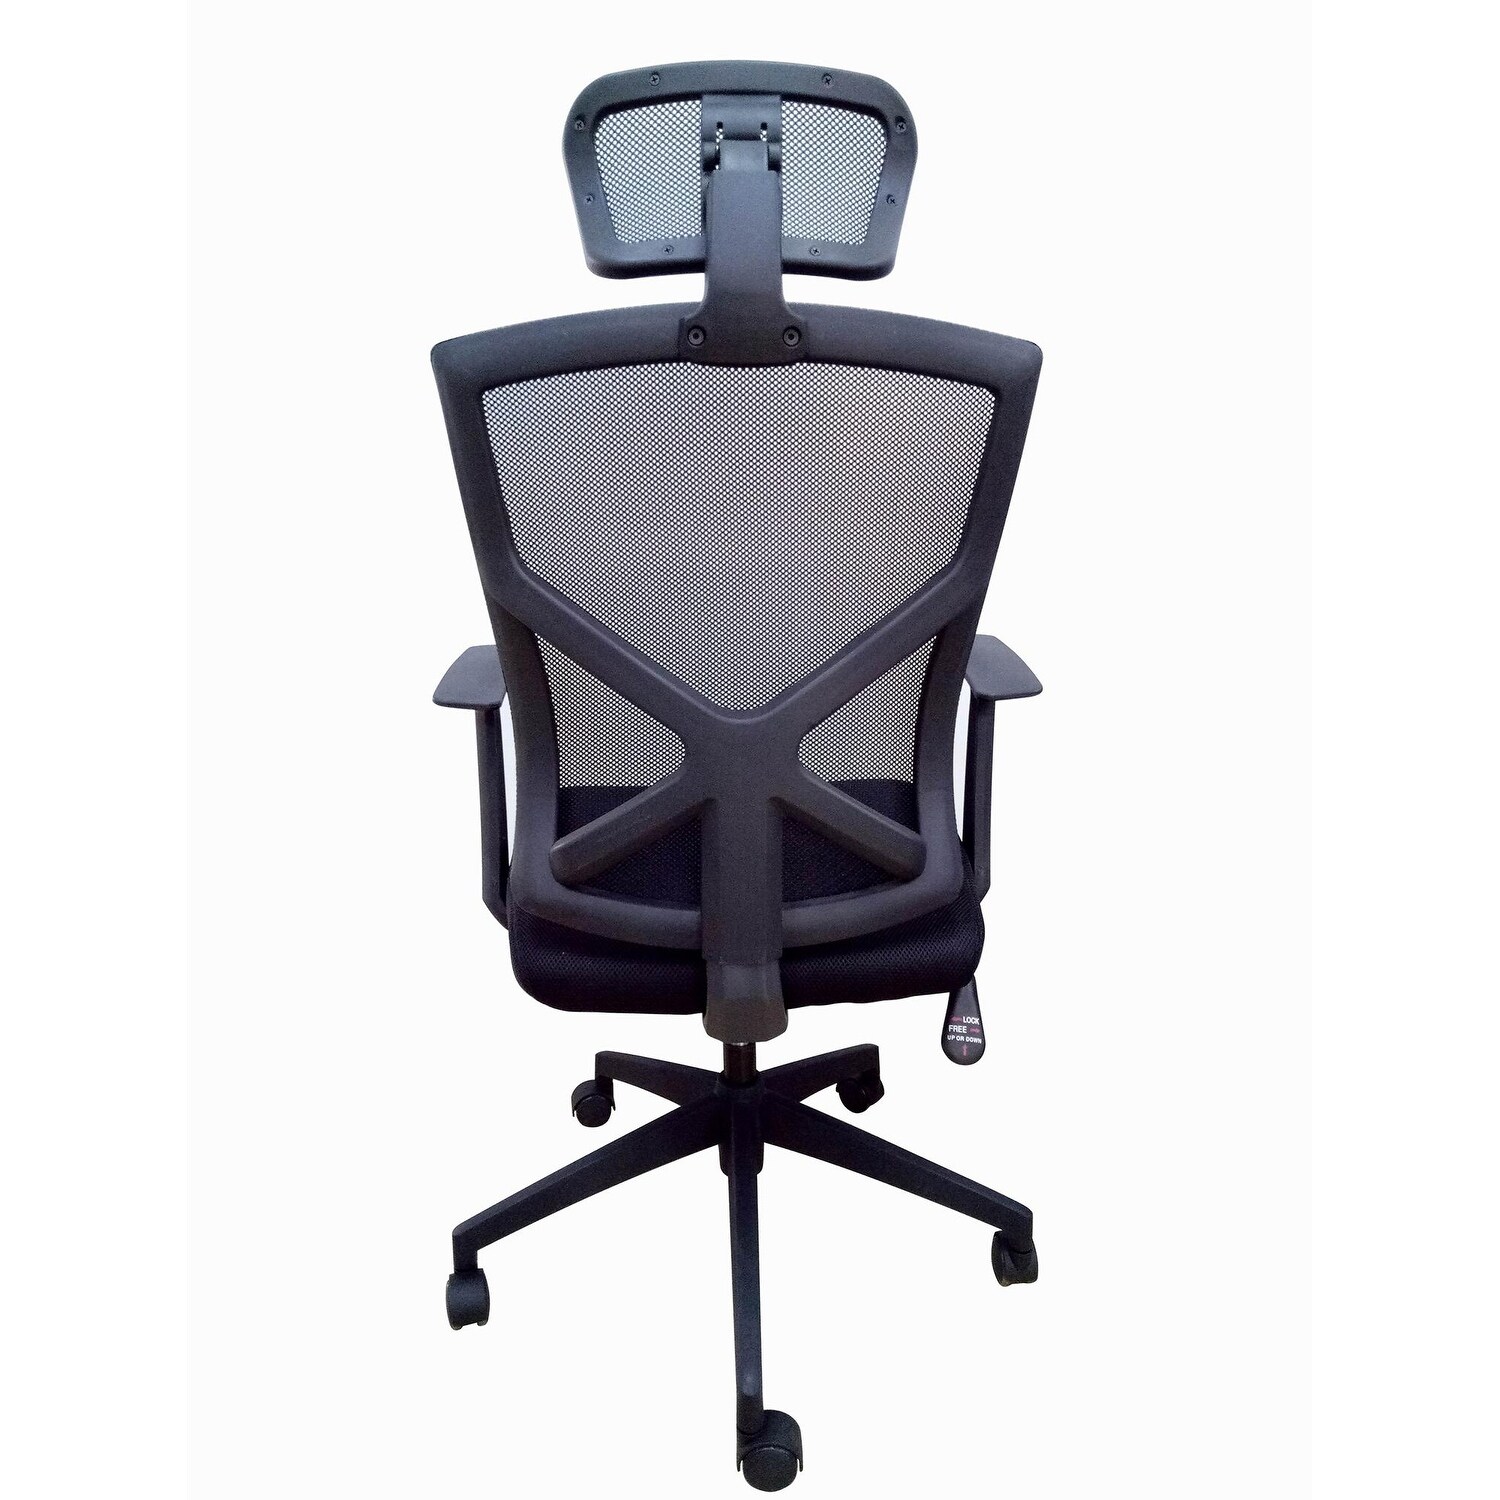 https://ak1.ostkcdn.com/images/products/is/images/direct/3dd6b084a33c223b2911fb5873460769a77ceff6/Modern-High-Back-With-Headrest-Chair-Office-Mesh-Chair-Tilt-Arms-Lumber-Support-Large-Base-Adjustable-Swivel-Task-Executive.jpg